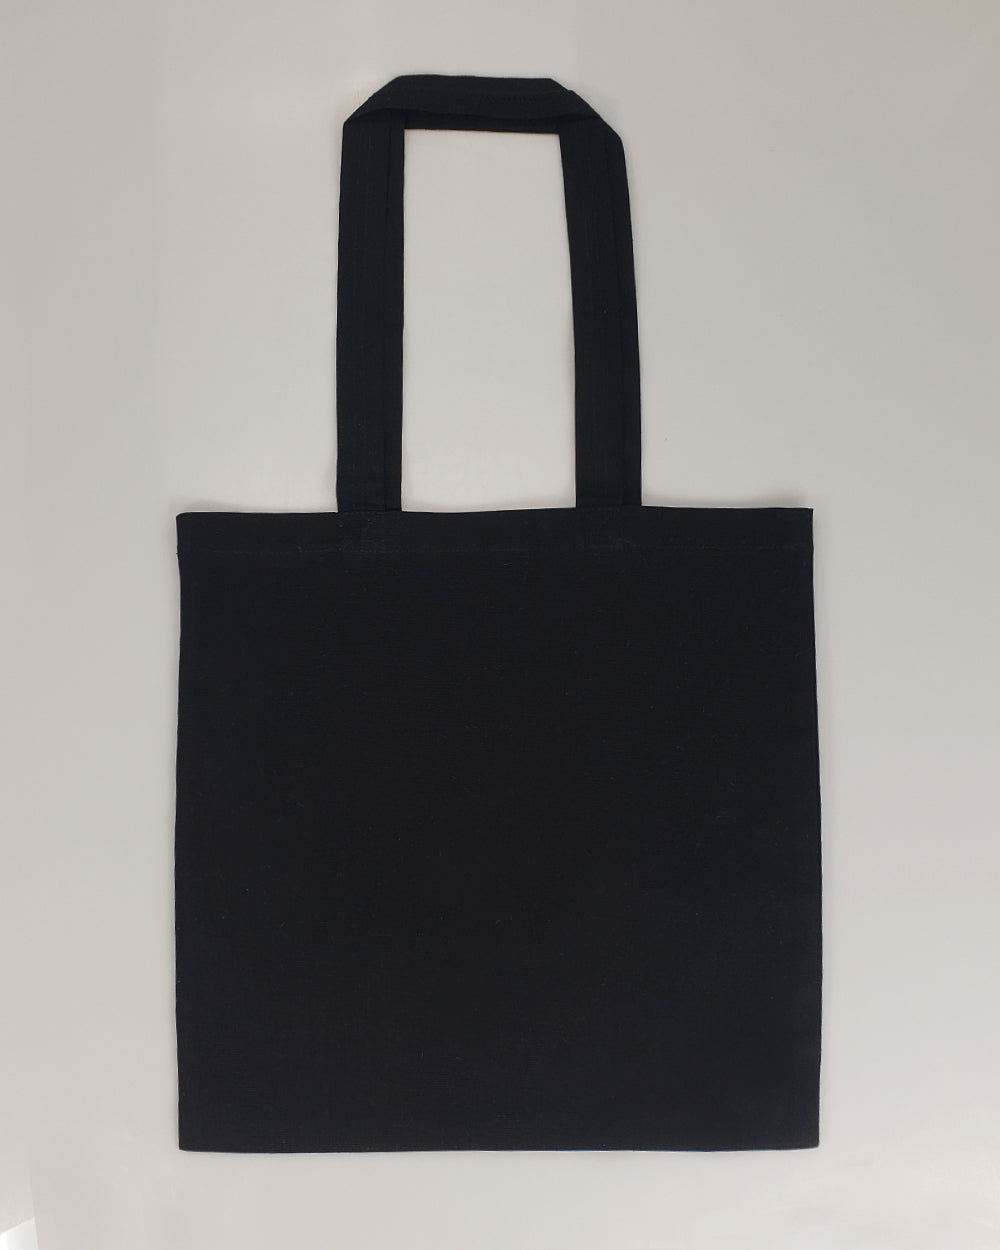 144 ct Eco-Friendly Canvas Convention Wholesale Tote Bags - By Case